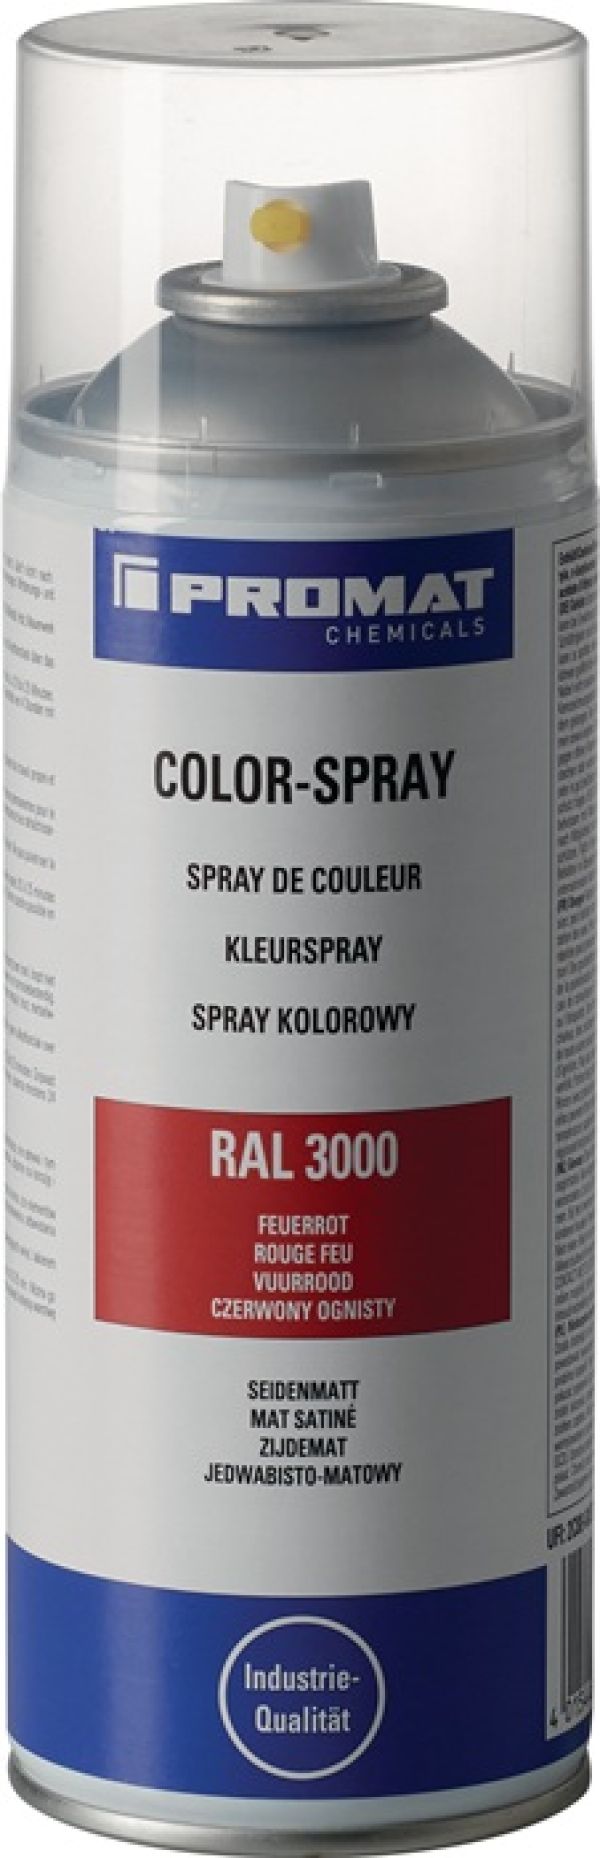 Colorspray PROMAT CHEMICALS